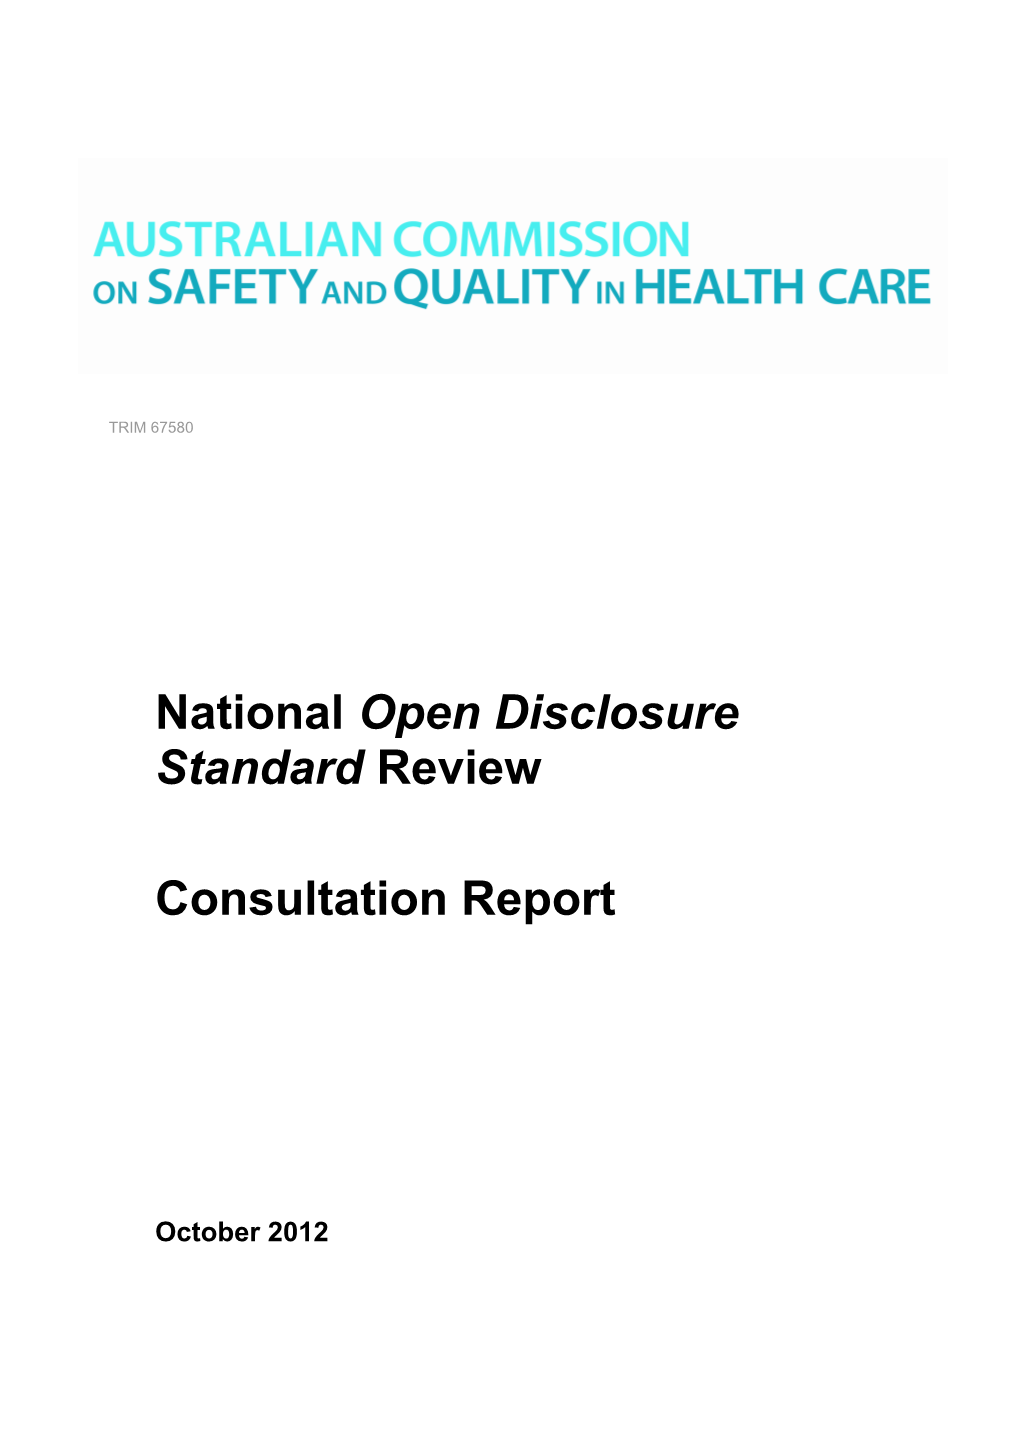 National Open Disclosure Standardreview